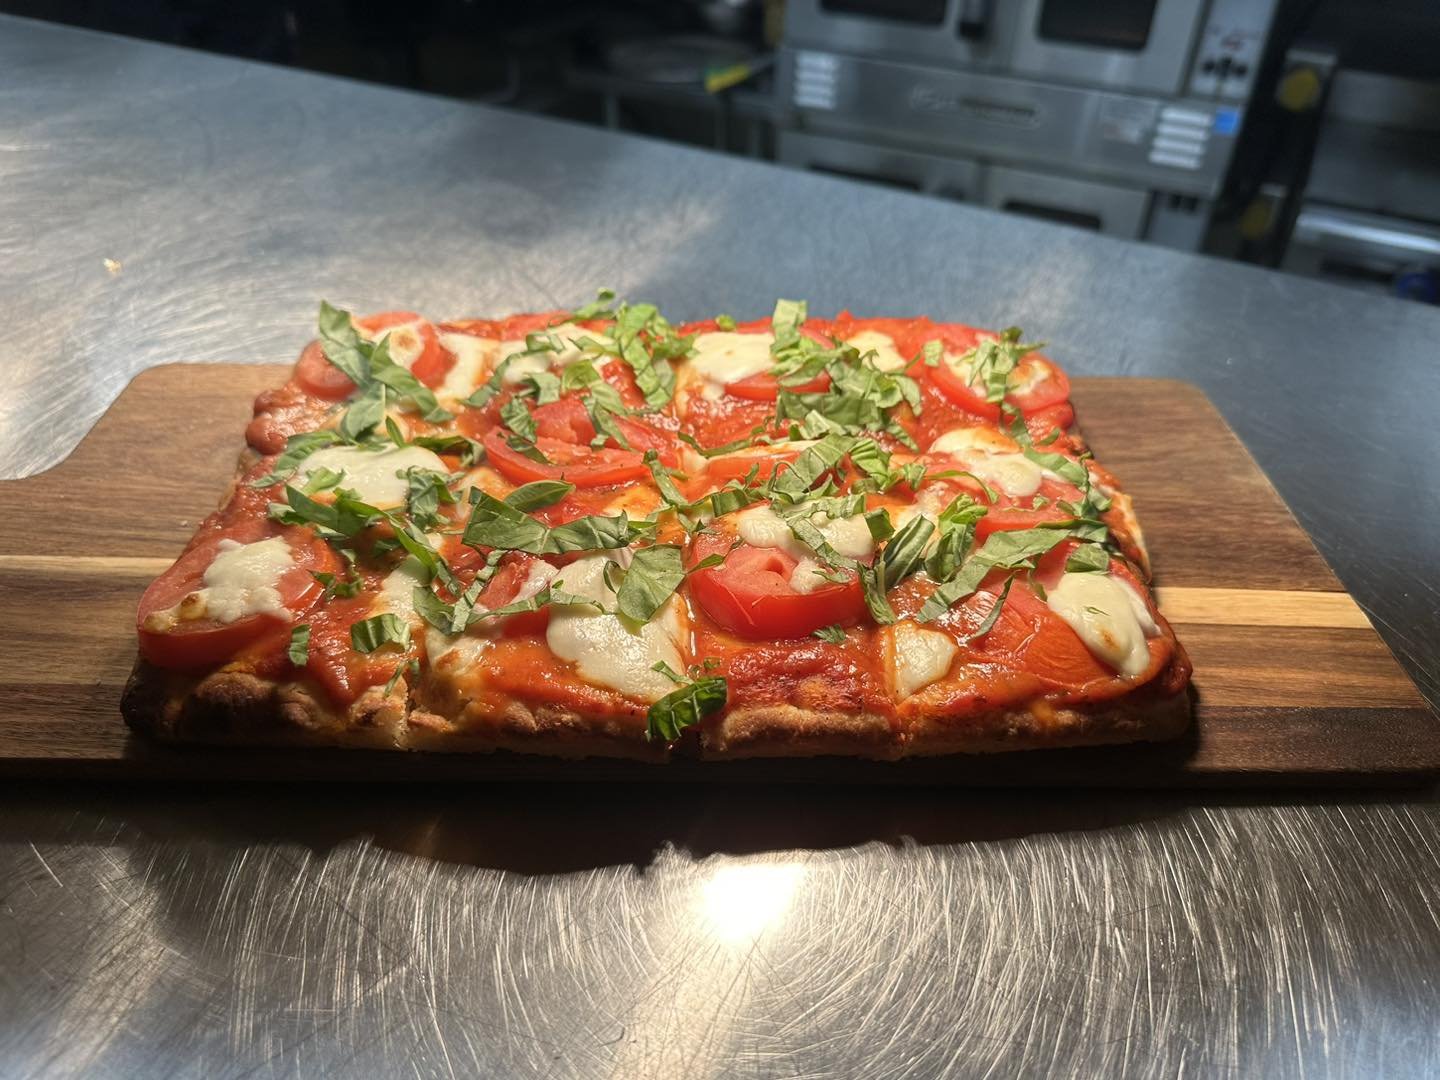 Have you tried our new pizza? Come out this week and give it a try.  Also new to Tirrito Farm, come welcome The Band Wanted this Saturday.

#thingstodowinwillcoxaz #relax #tirritofarms #TirritoFarm #farmtours #vineyards #winetasting #thecasitasattirr